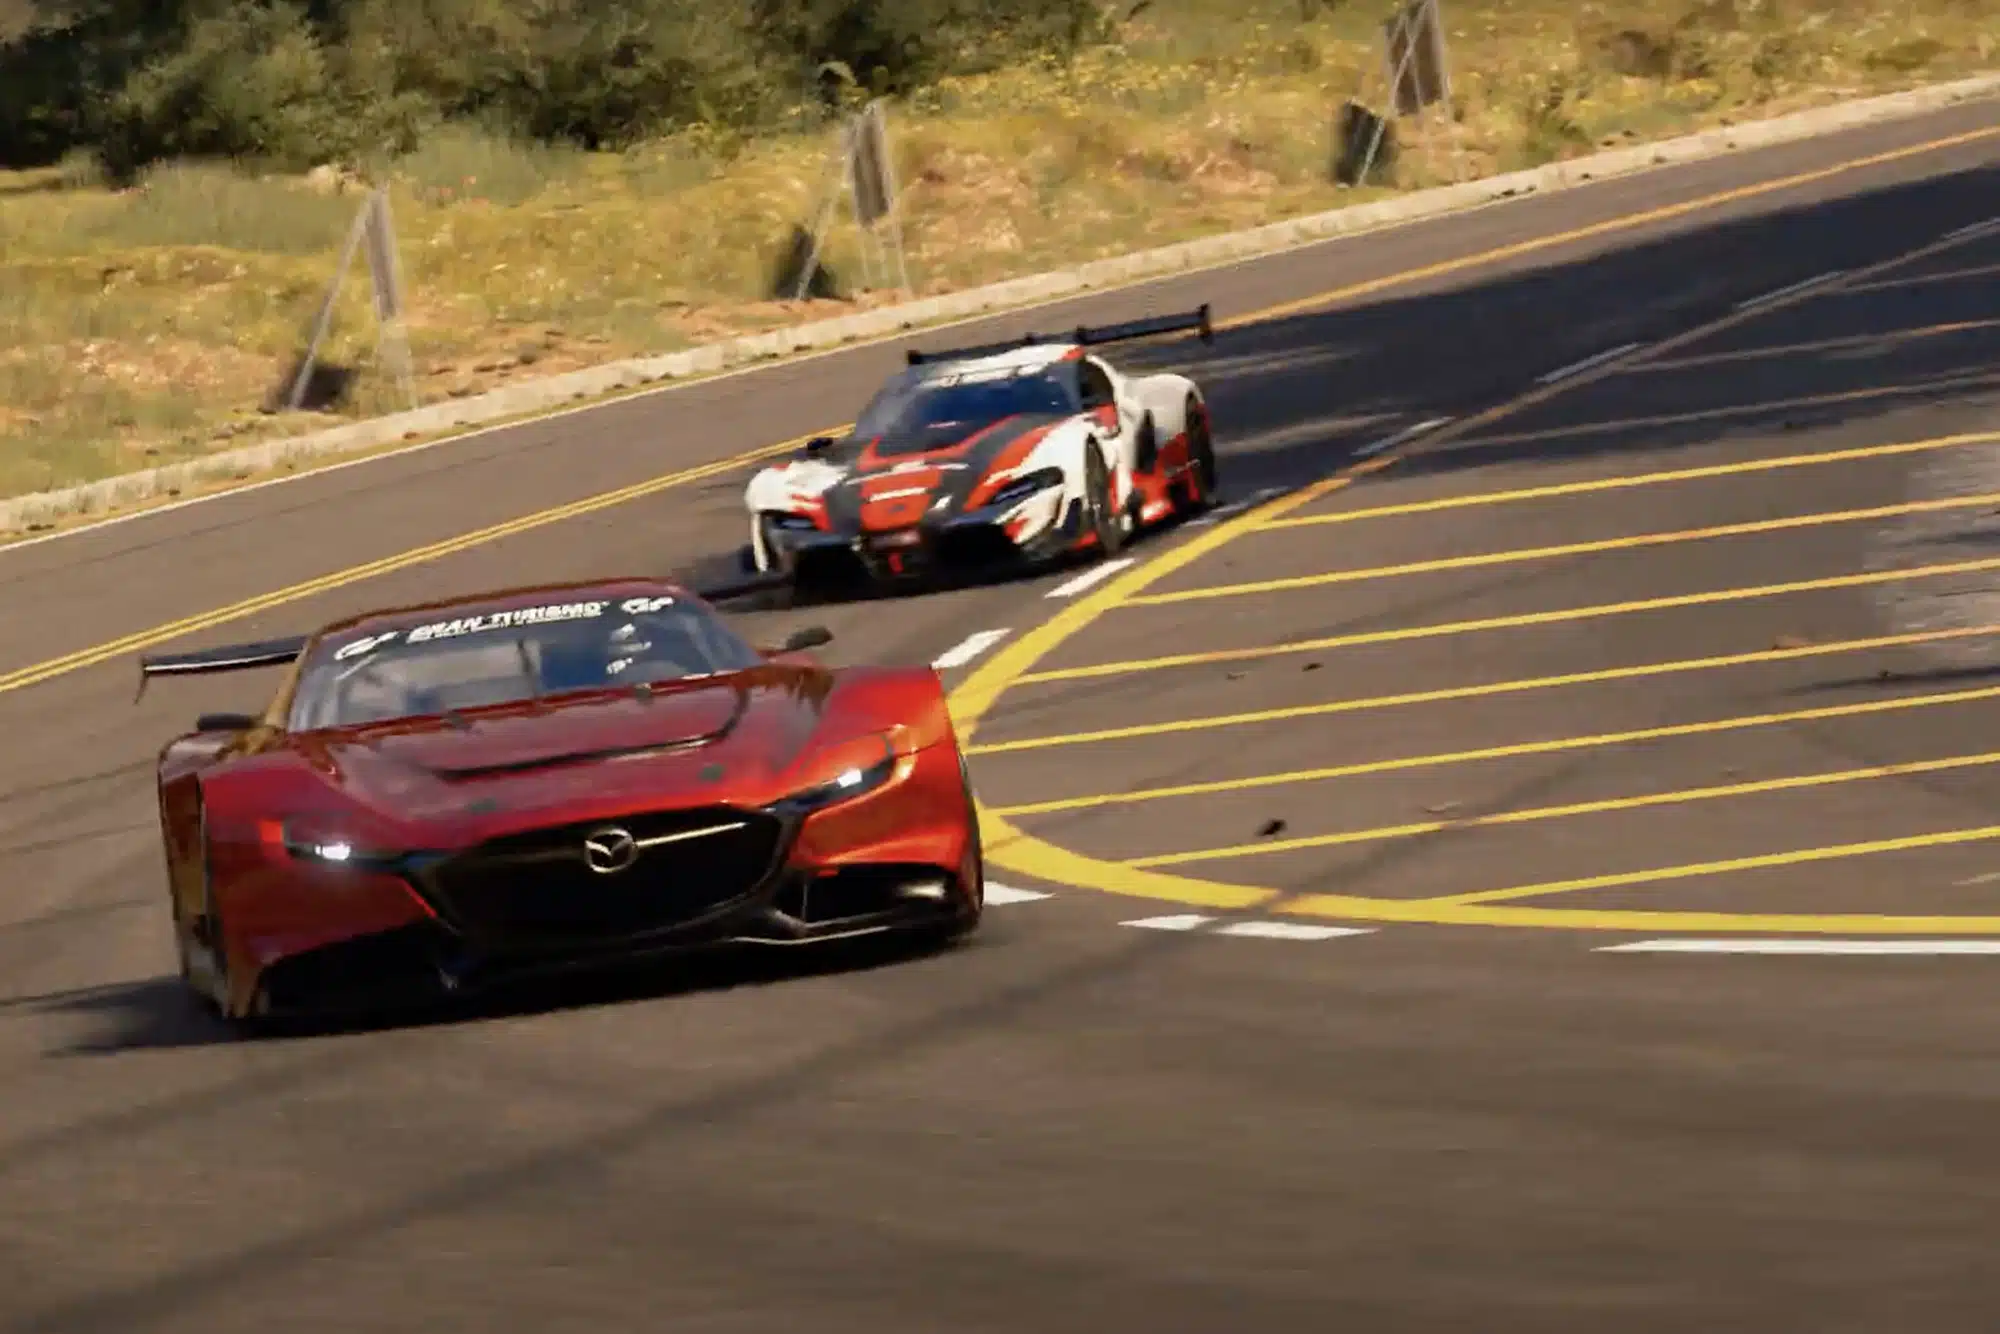 Will Gran Turismo 7 Have Split Screen On PS5? - PlayStation Universe